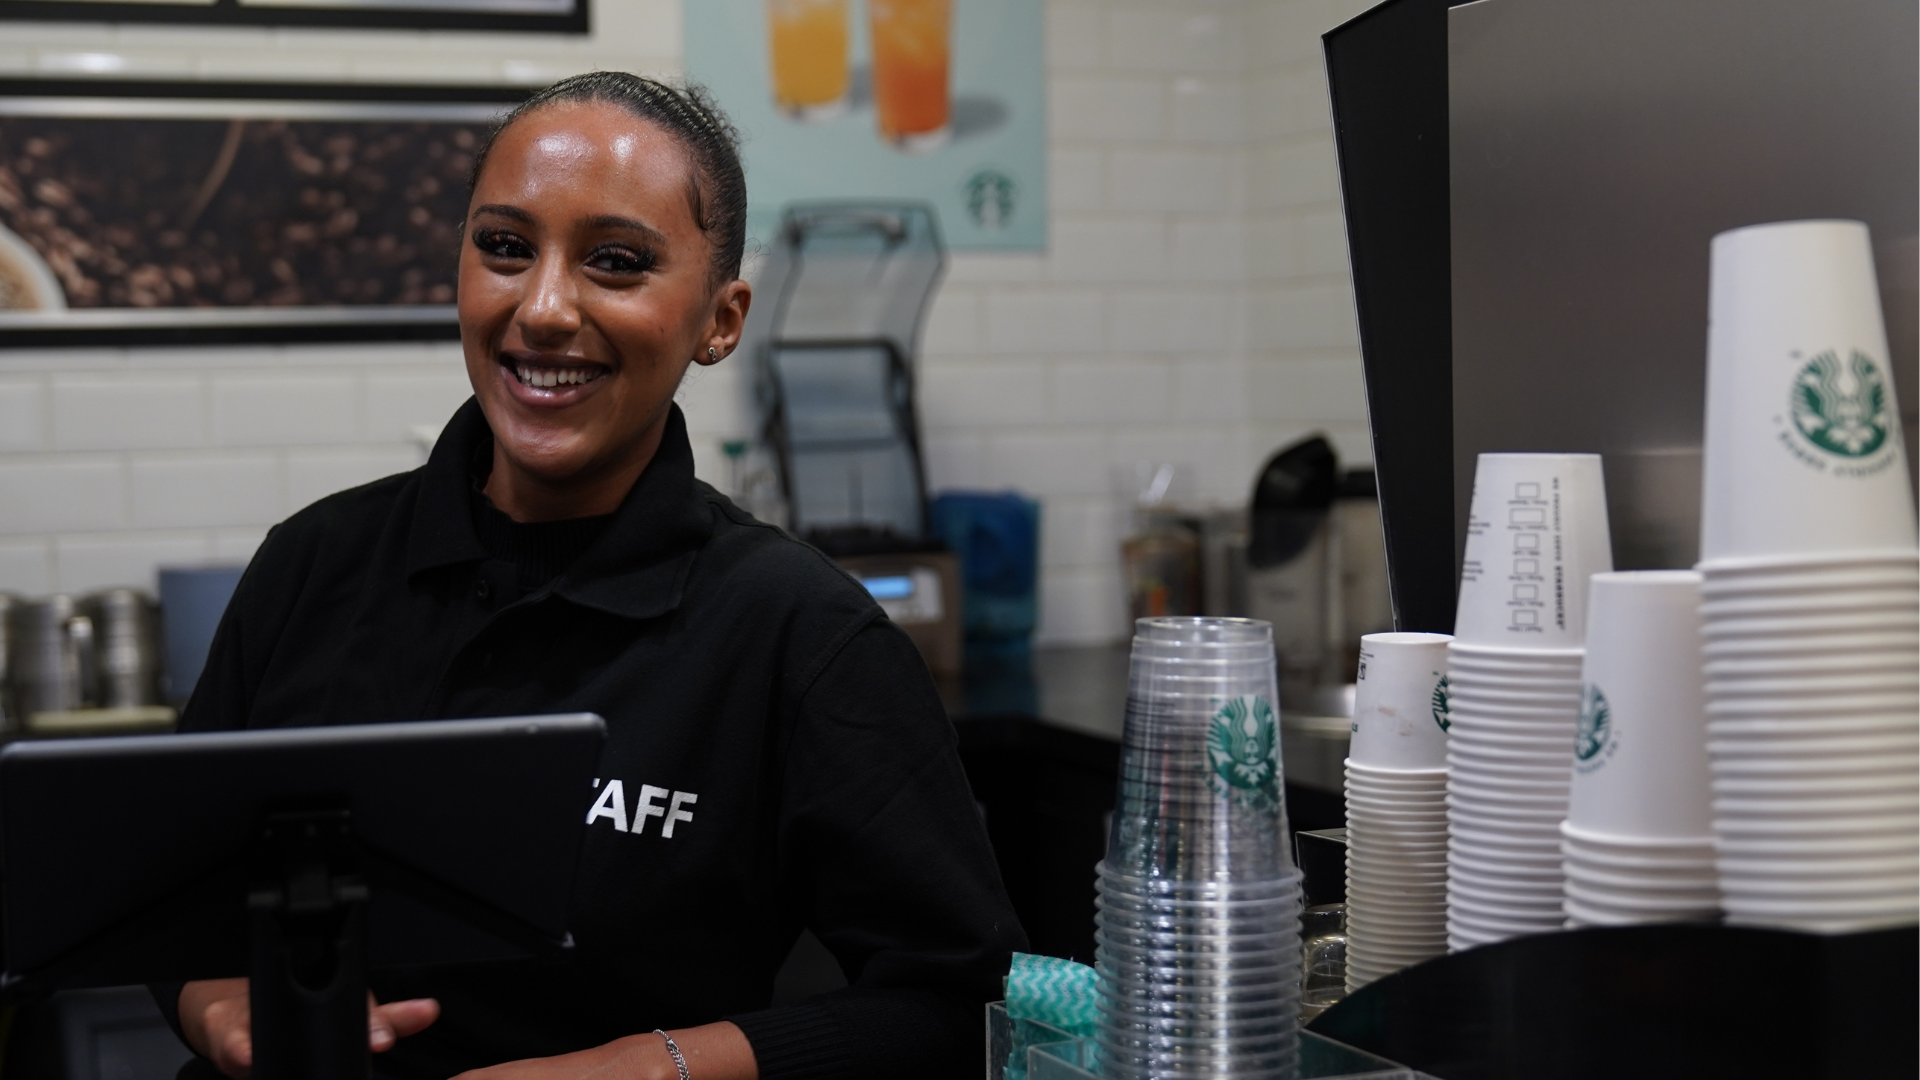 Staff member at the counter smiling